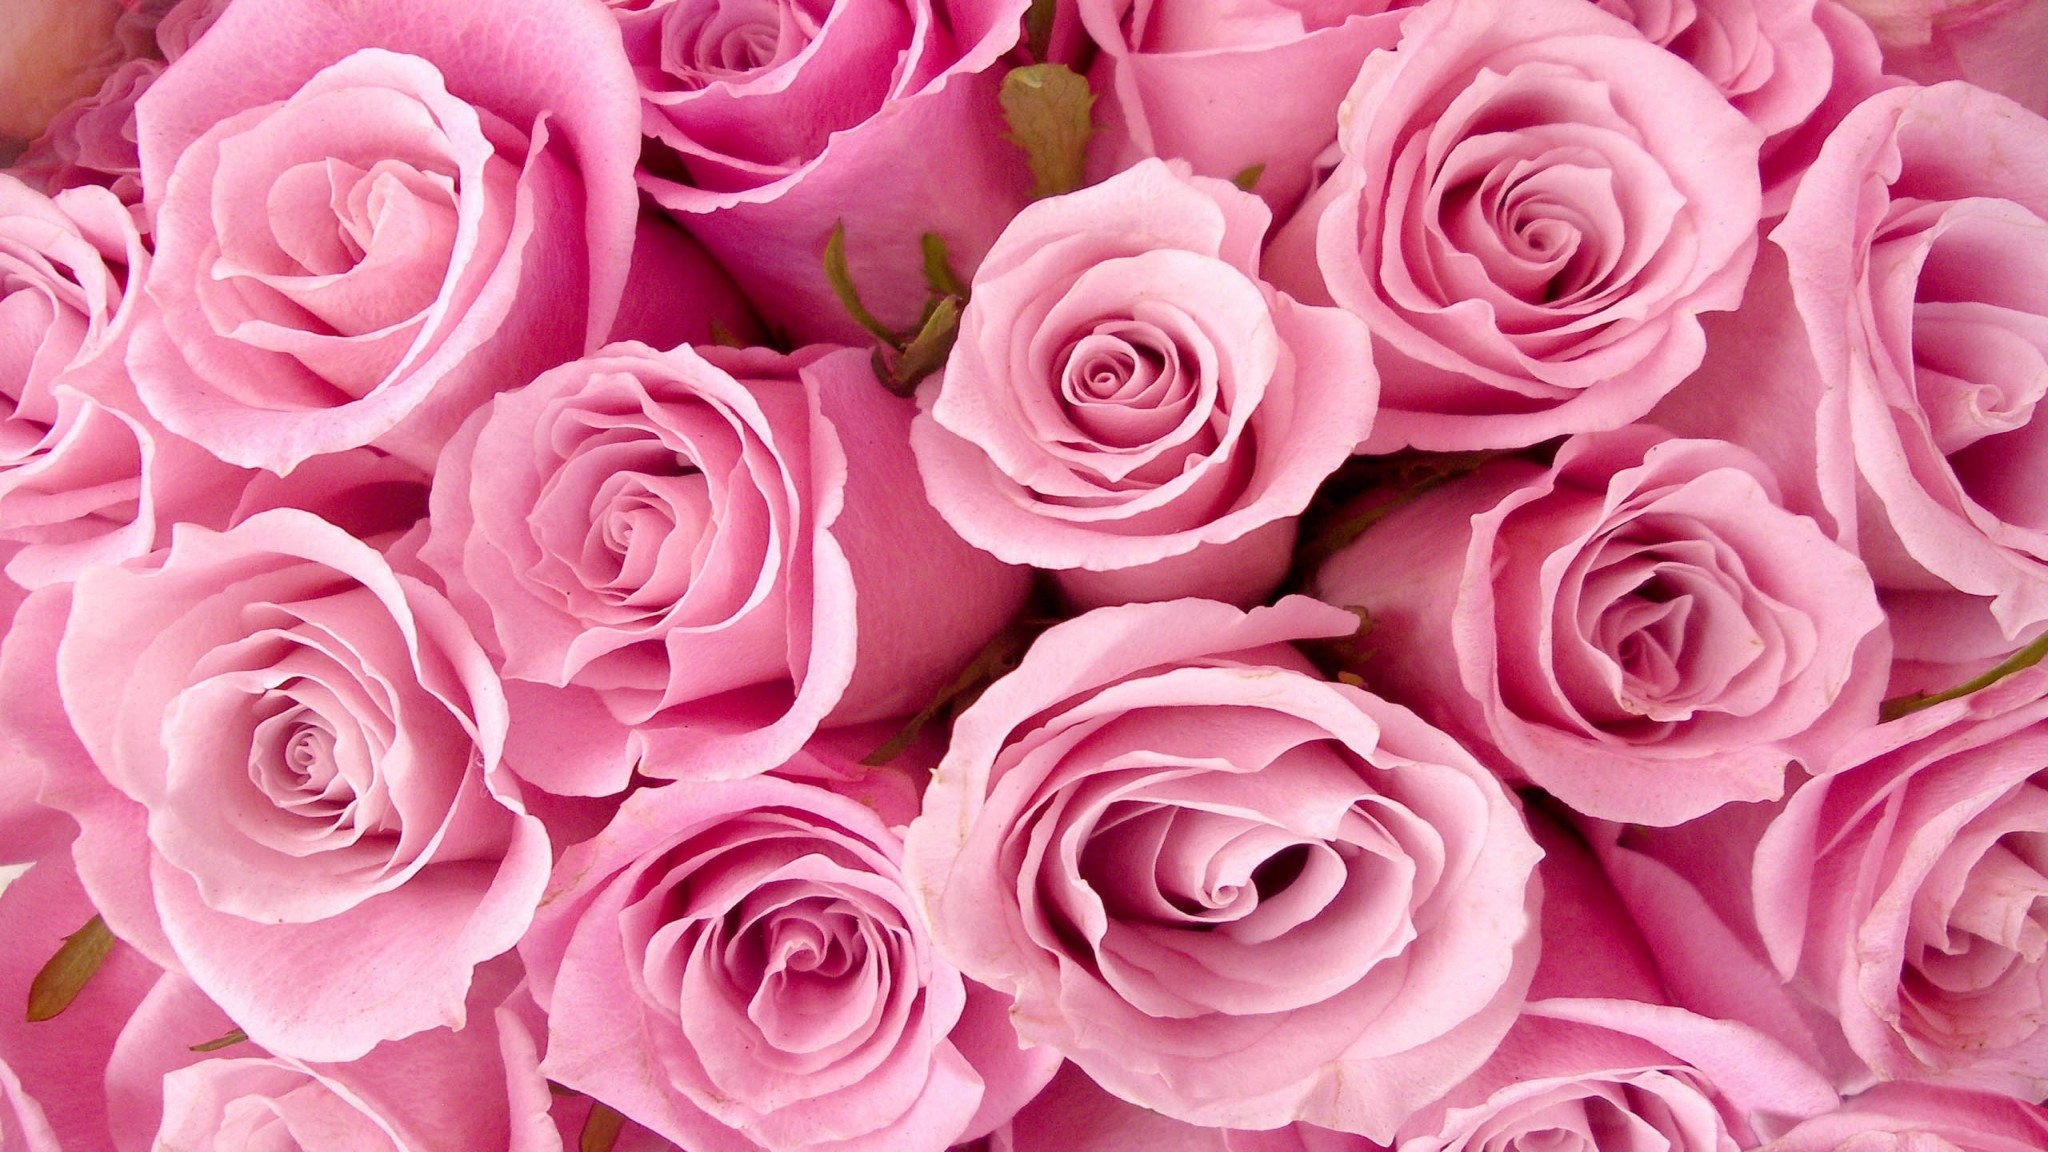 2048x1152 Wallpapers : Special Pink Roses #1289 2560x1600 pixel Exotic Wallpaper .